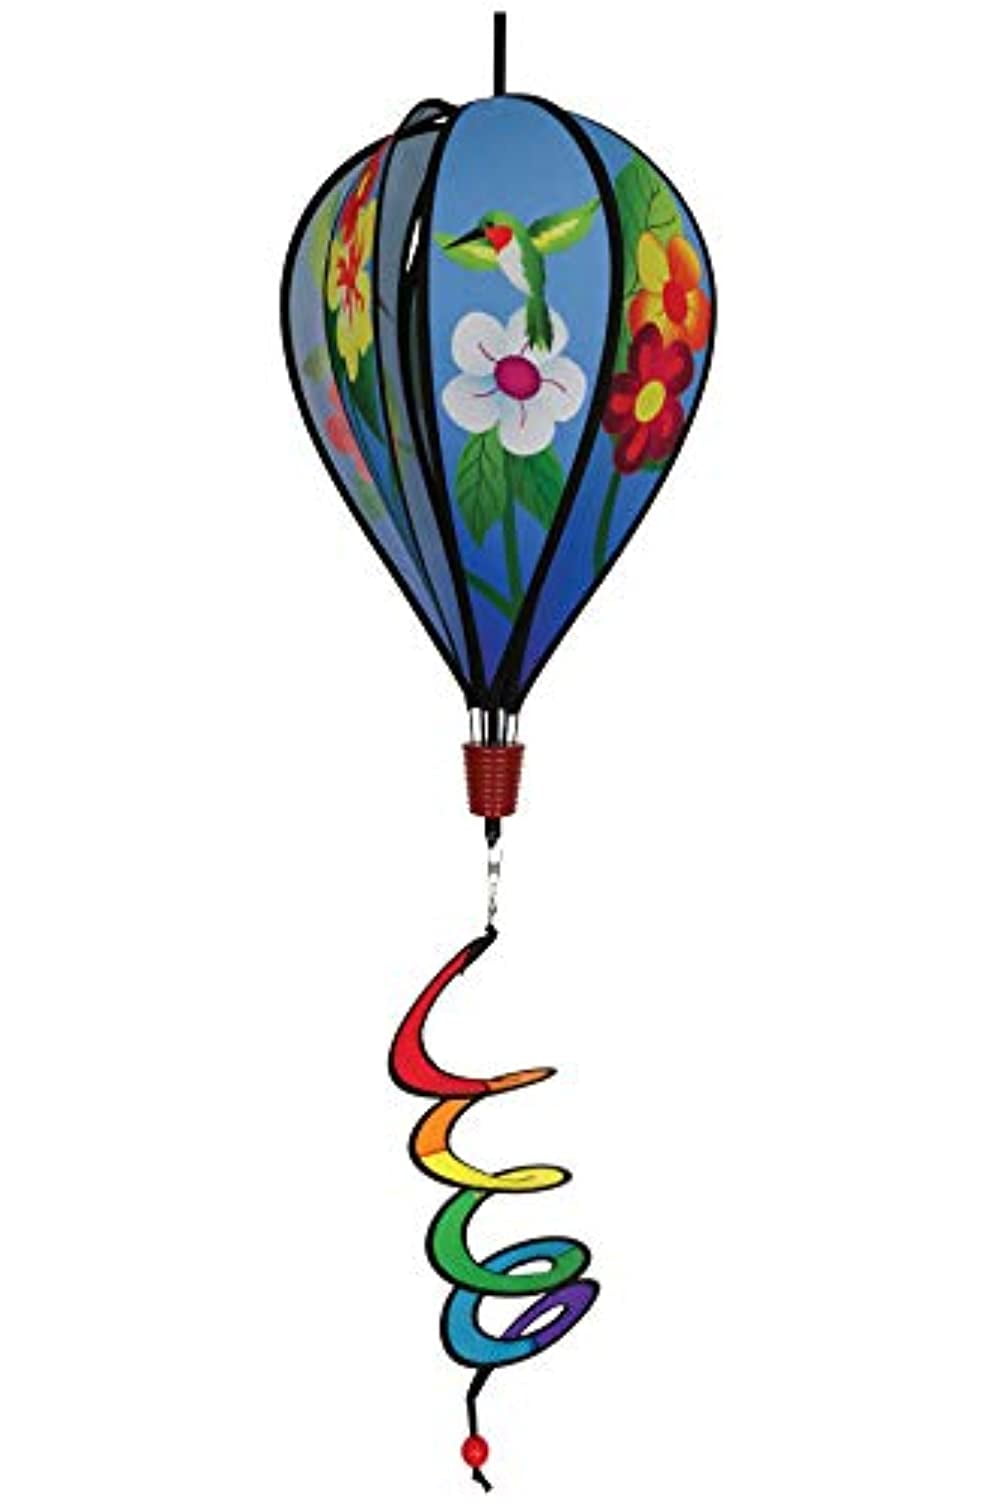 random Color PiniceCore 1pc Hot Air Balloon Windmill Wind Spinner Garden Outdoor Toy Party Favor Supplies